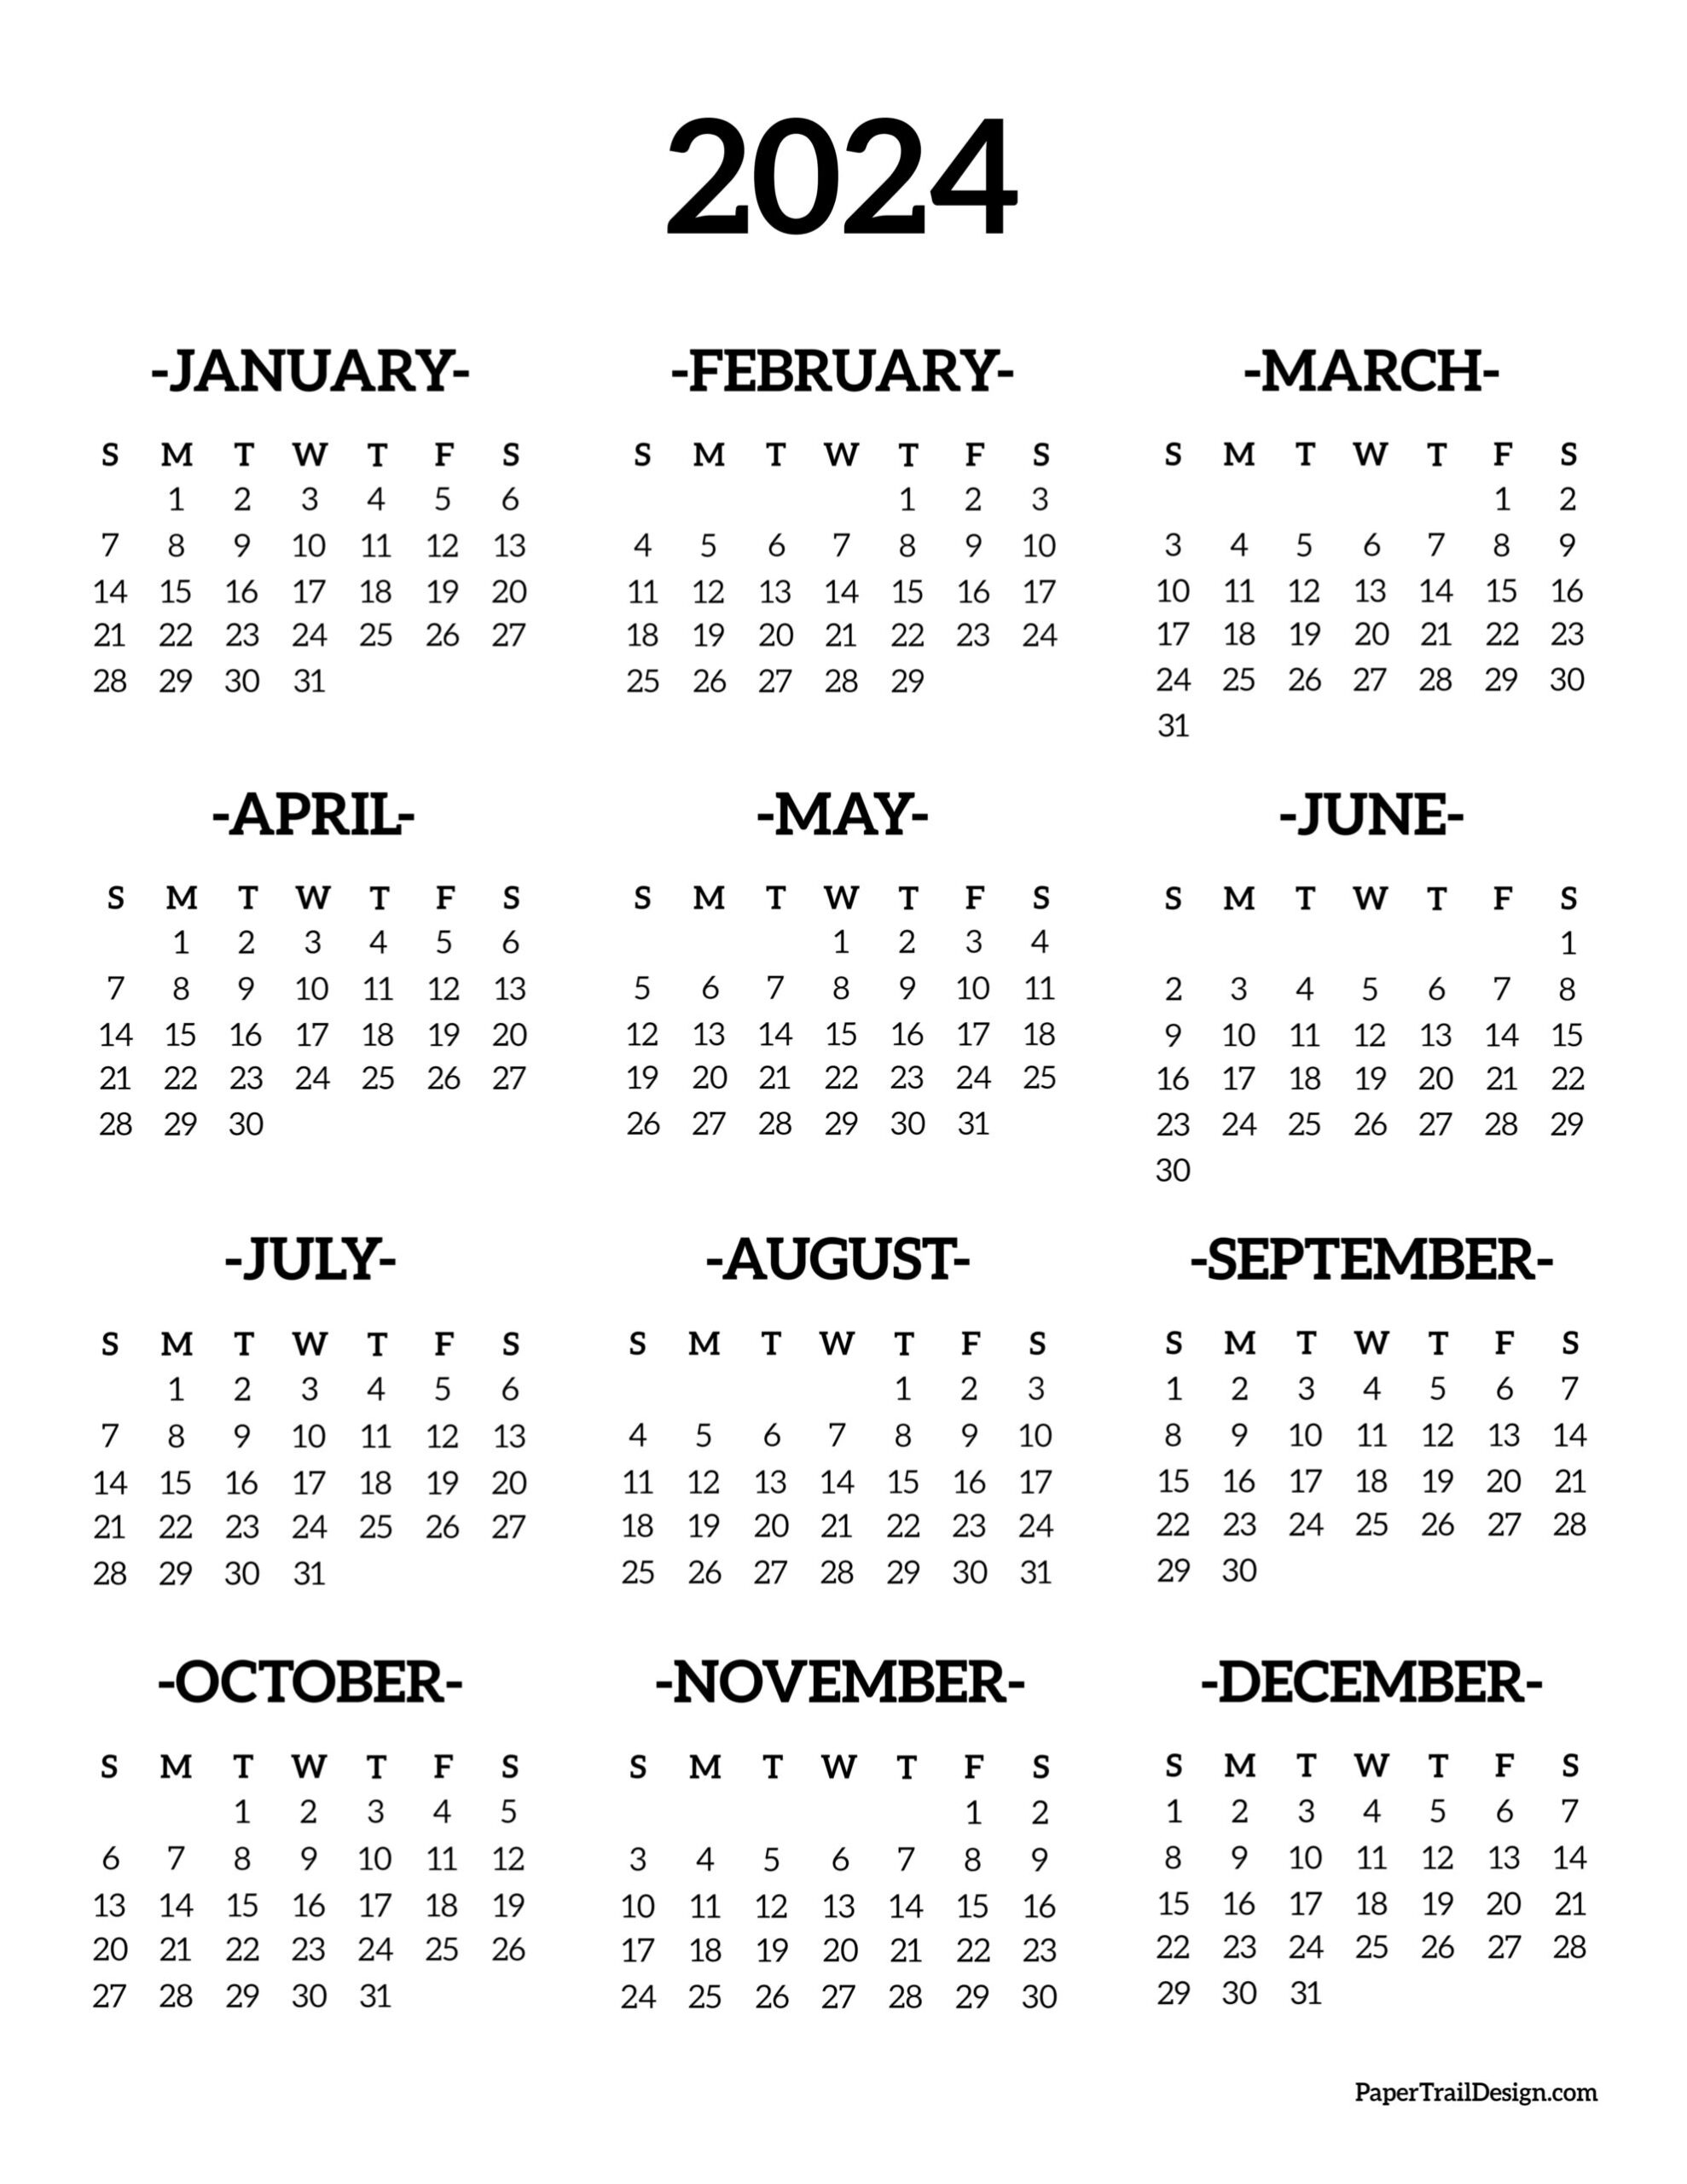 Calendar 2024 Printable One Page - Paper Trail Design for Free Printable 2024 Year Calendar